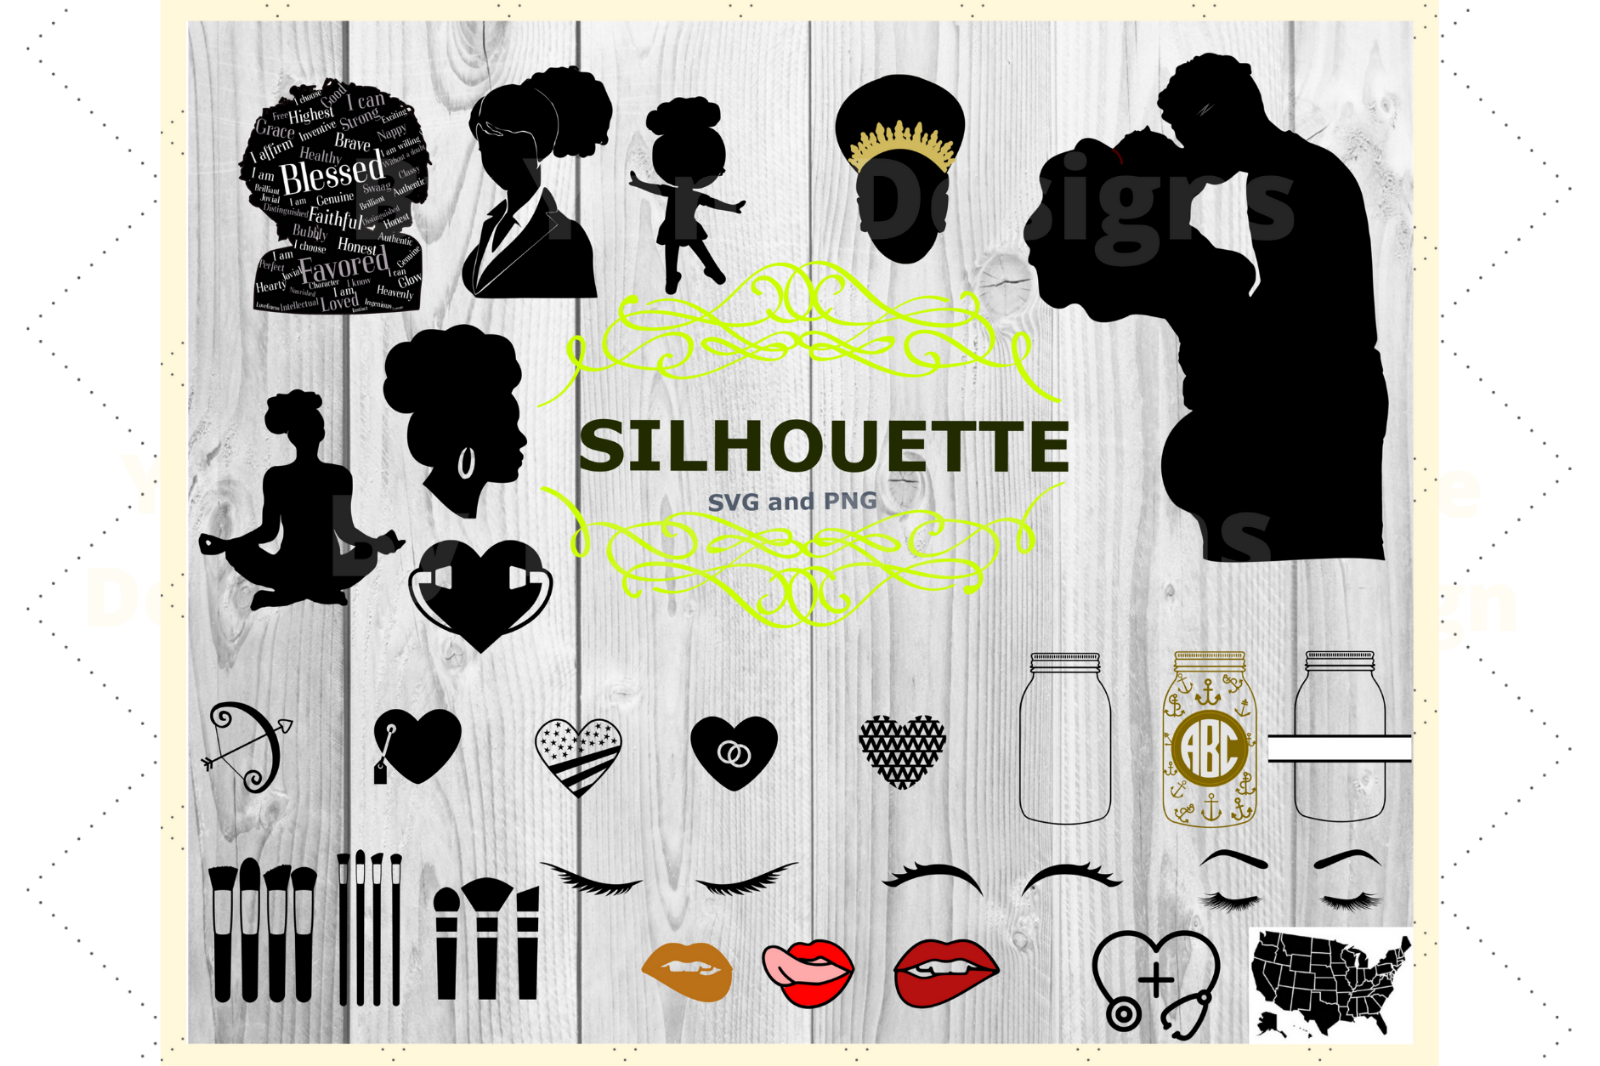 Download Free Svg Cut File Bundle Commercial Use Allowed African American Black Woman Silhouette Svg